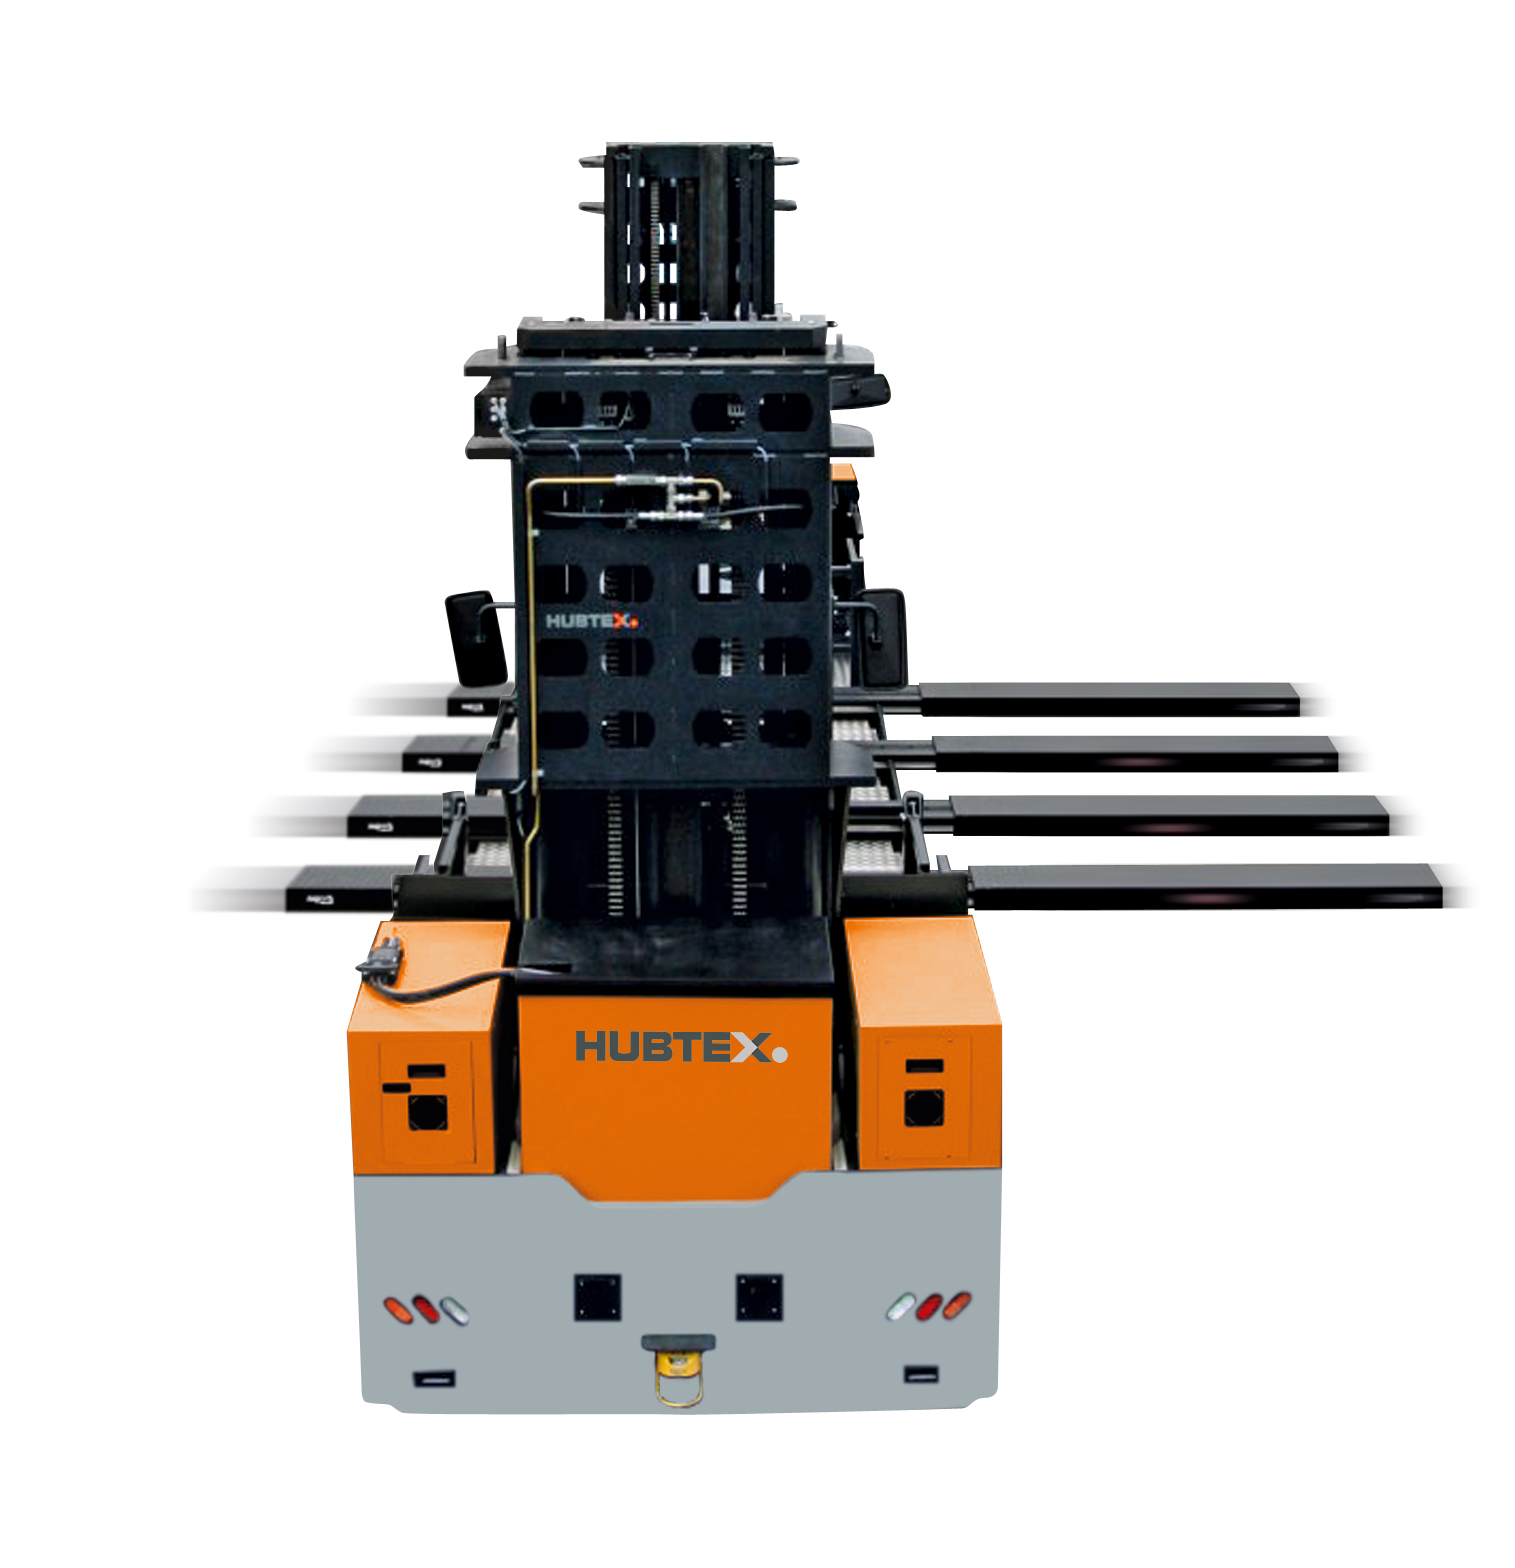 Electric two-sided order picking platform with vacuum suction